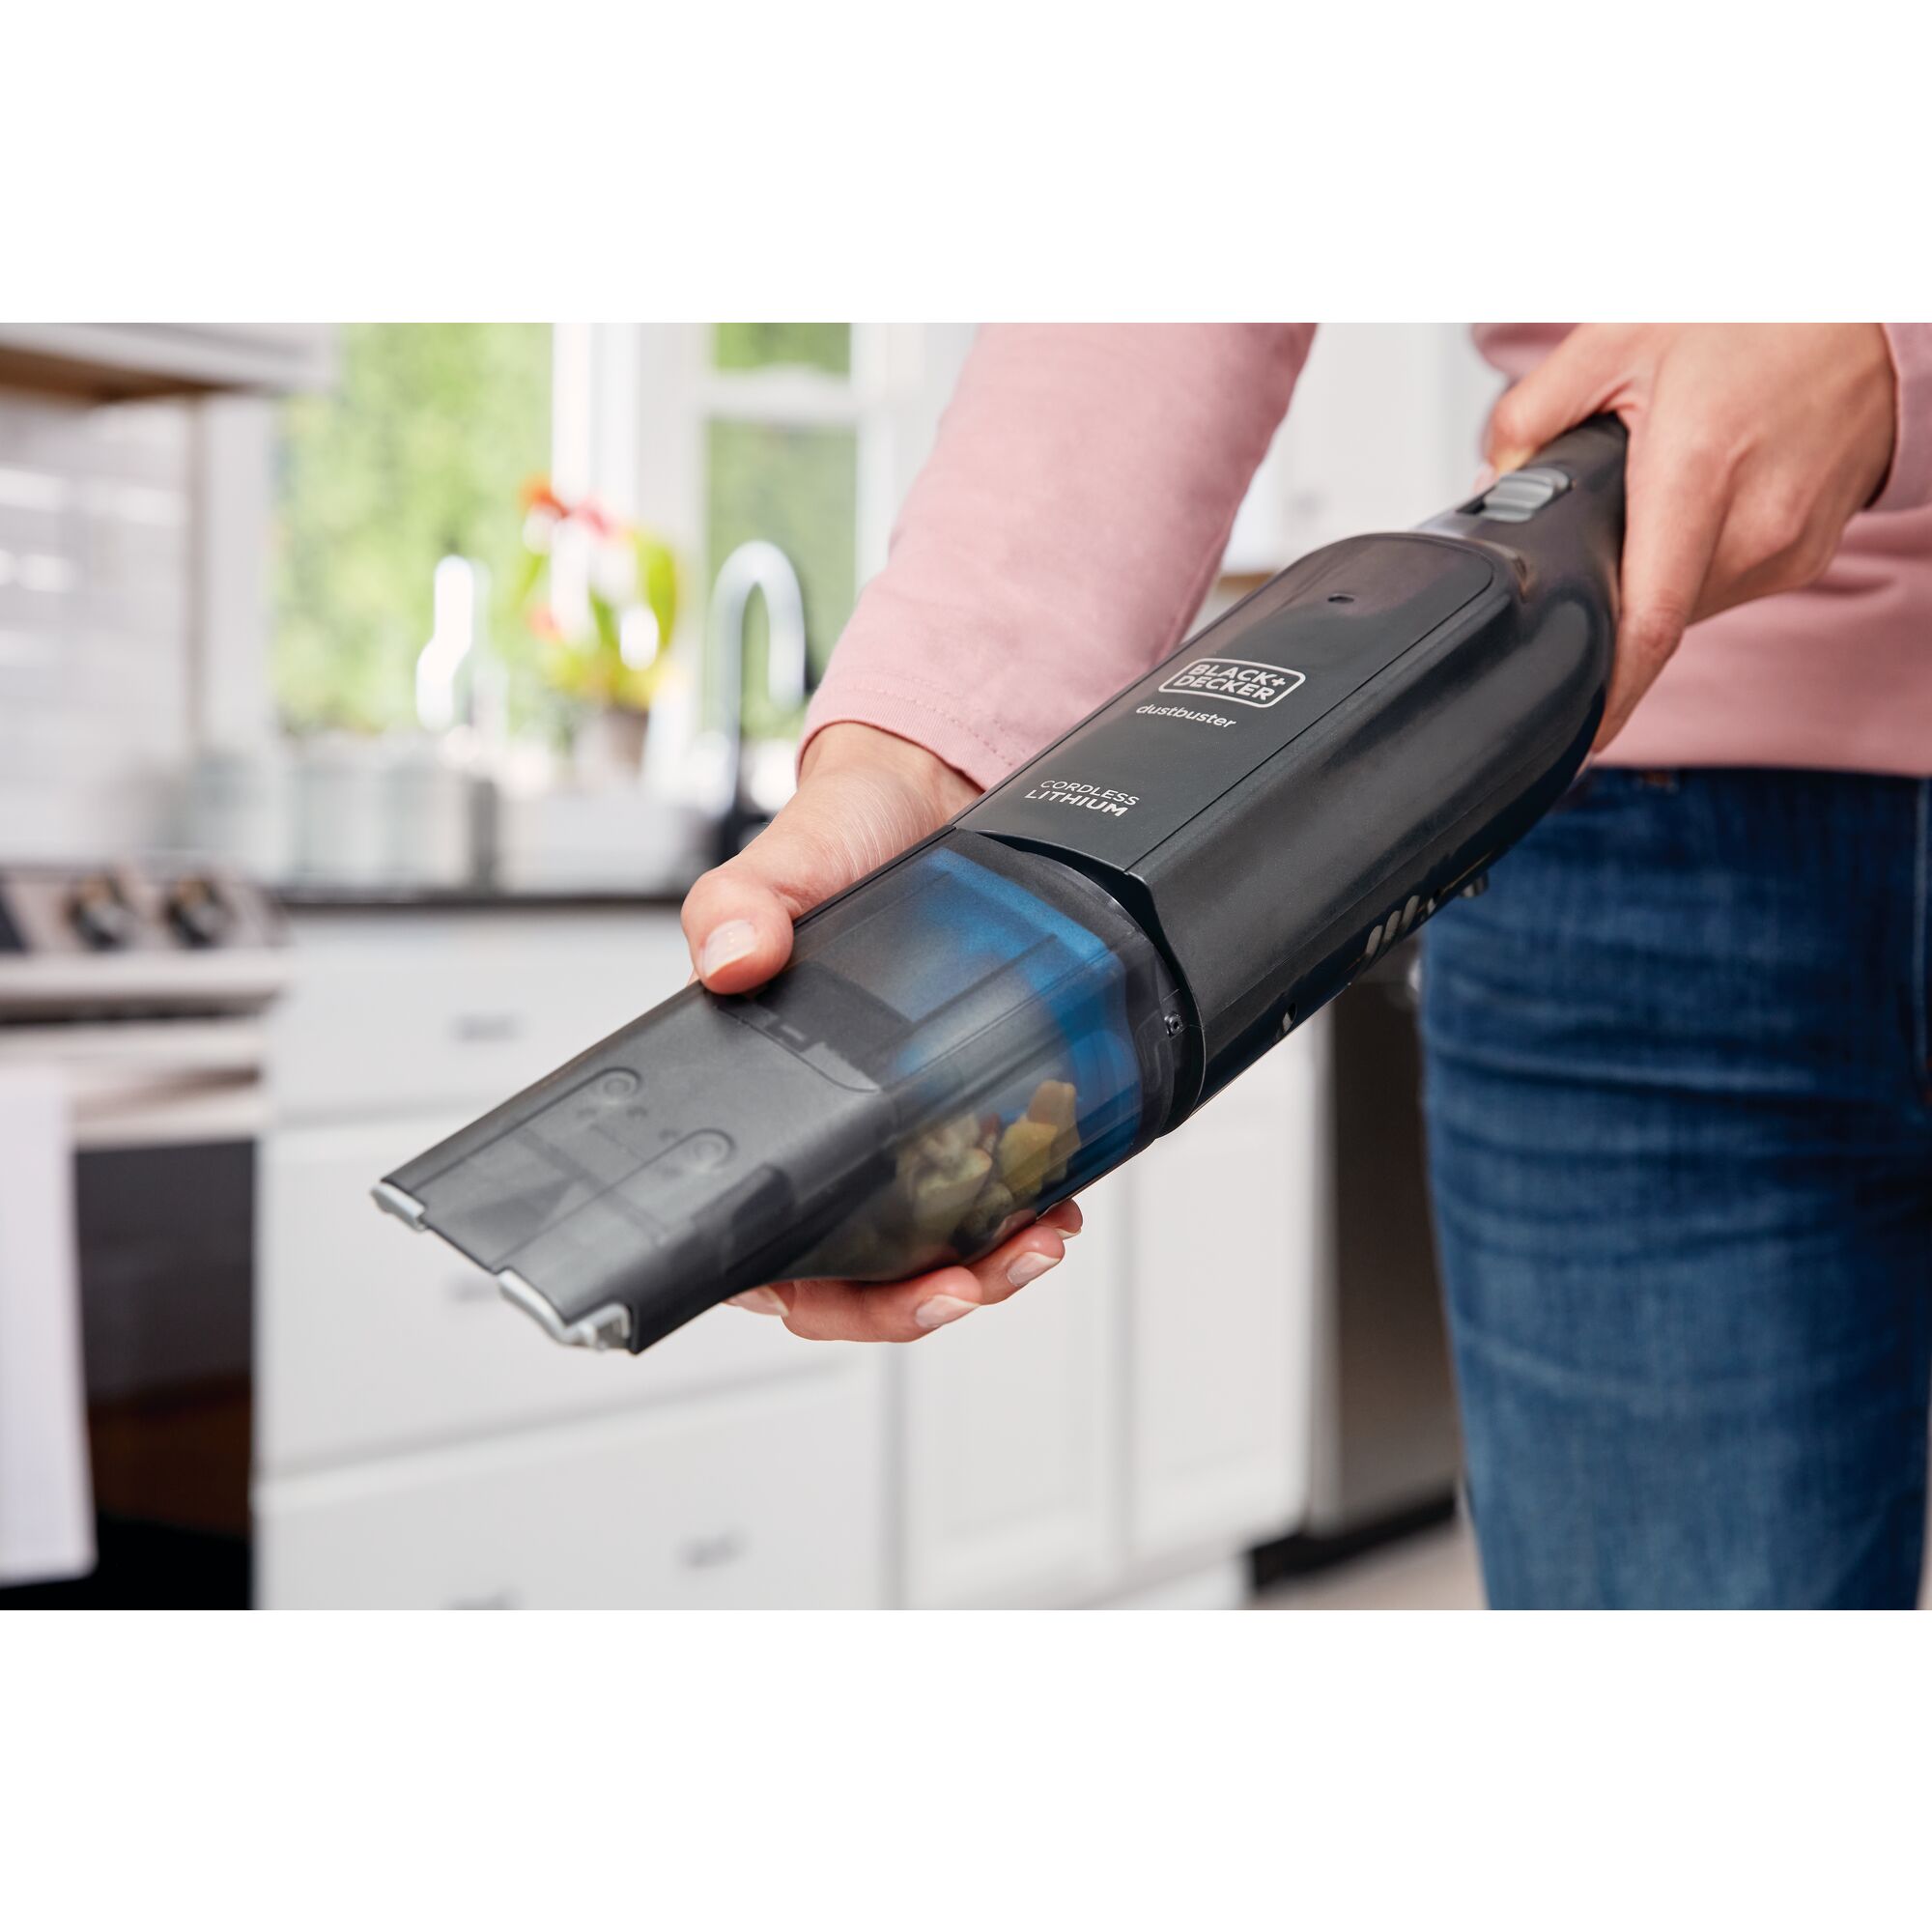 Twist off bowl and washable filter feature of dustbuster AdvancedClean Cordless Hand Vacuum.